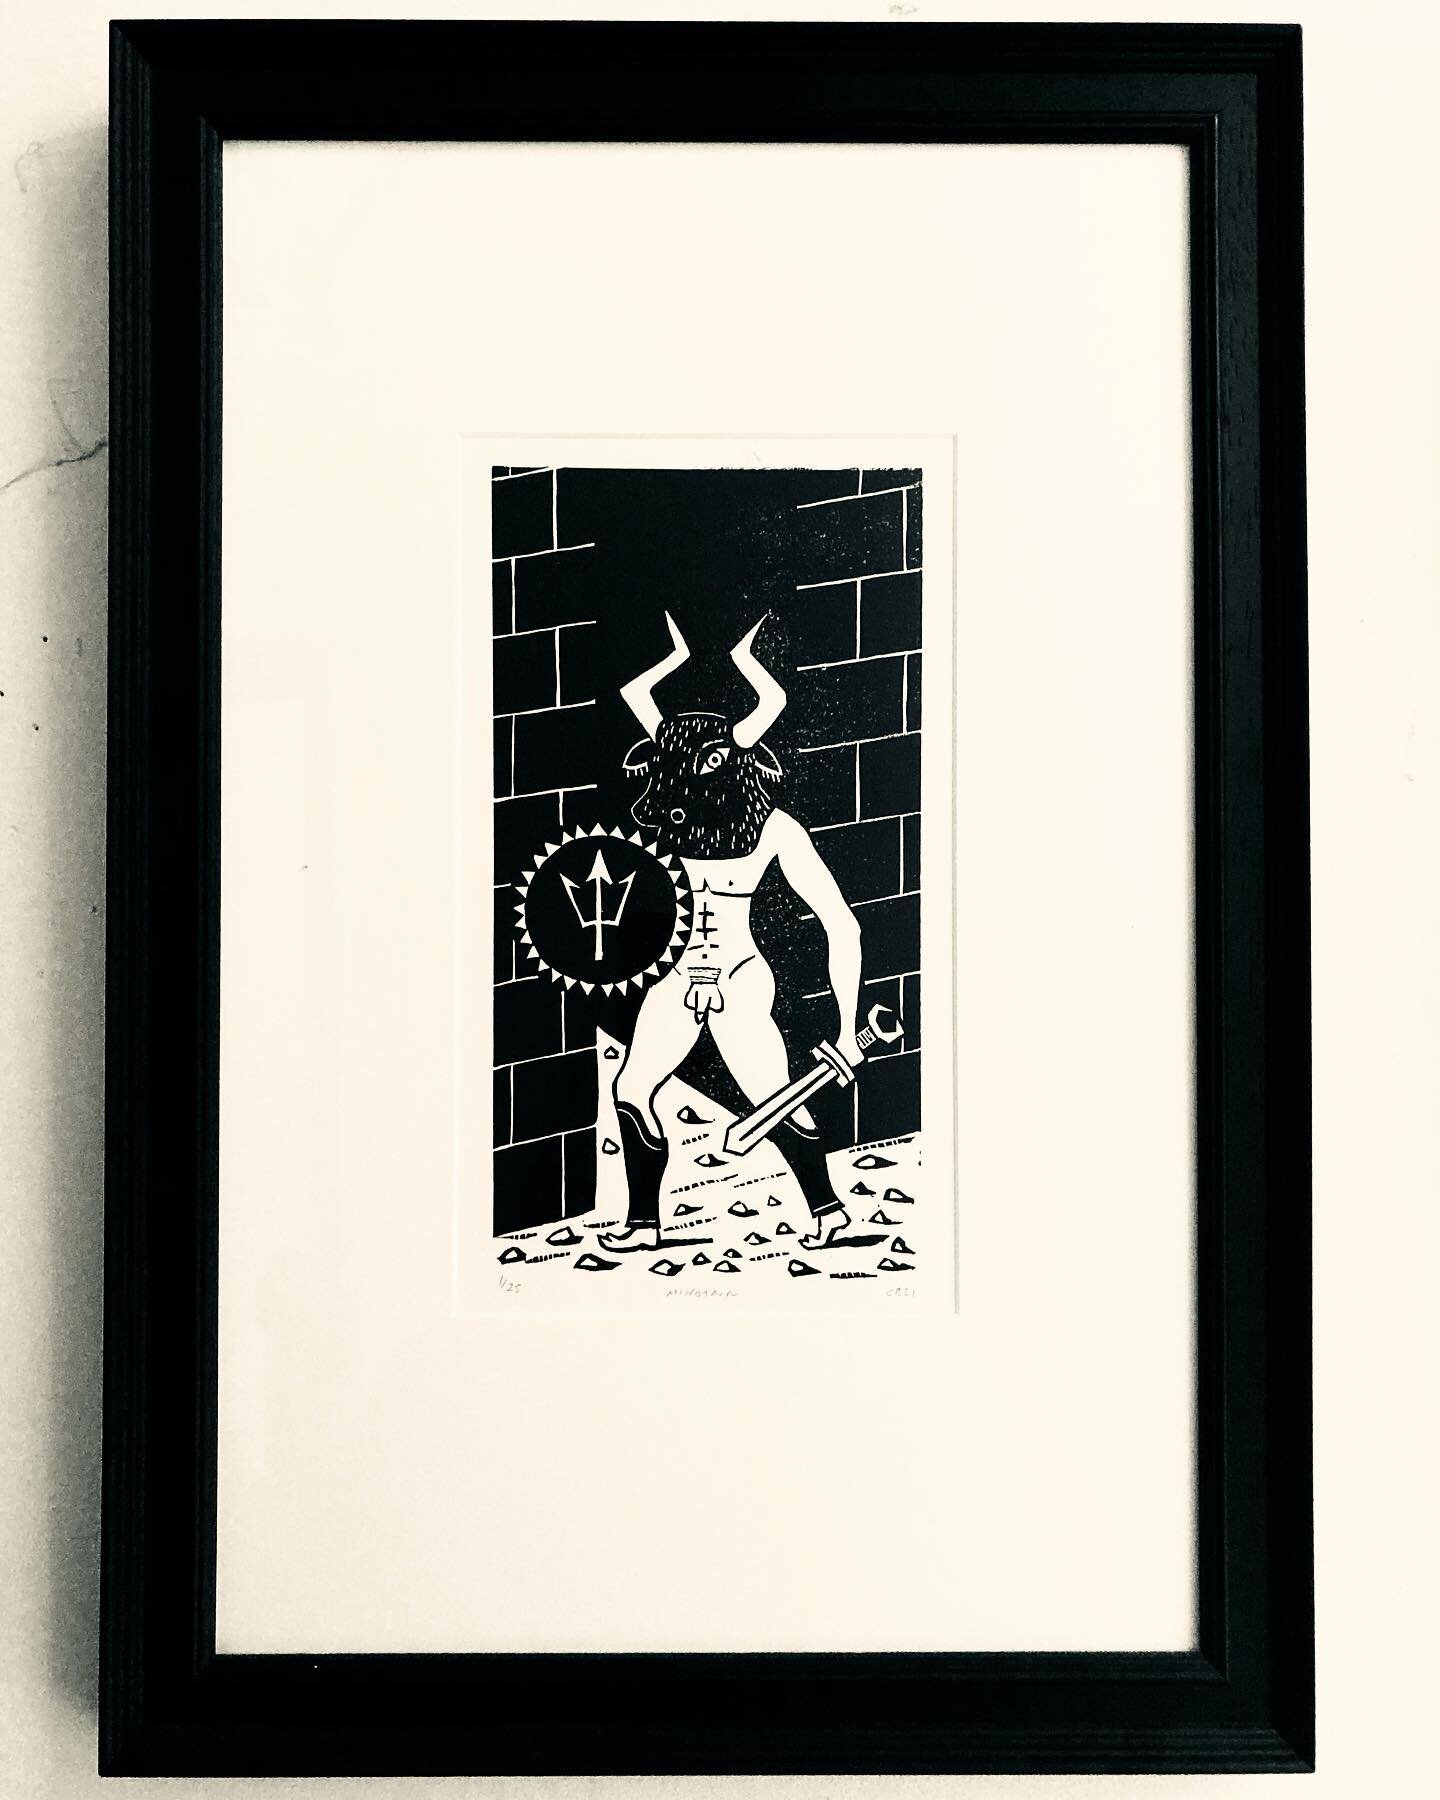 🗡️M I N O T A U R 🗡️ Framed Linocut by @christopherbrownlino 🗡️ On the wall at our Exhibition Meet the Georgians and Others in Chelsea 🗡️ Open 11-7 until 21 May 🗡️#minotaur #Minotaur #christopherbrownlino #linocut #lincutprint #framedlinocut #pa